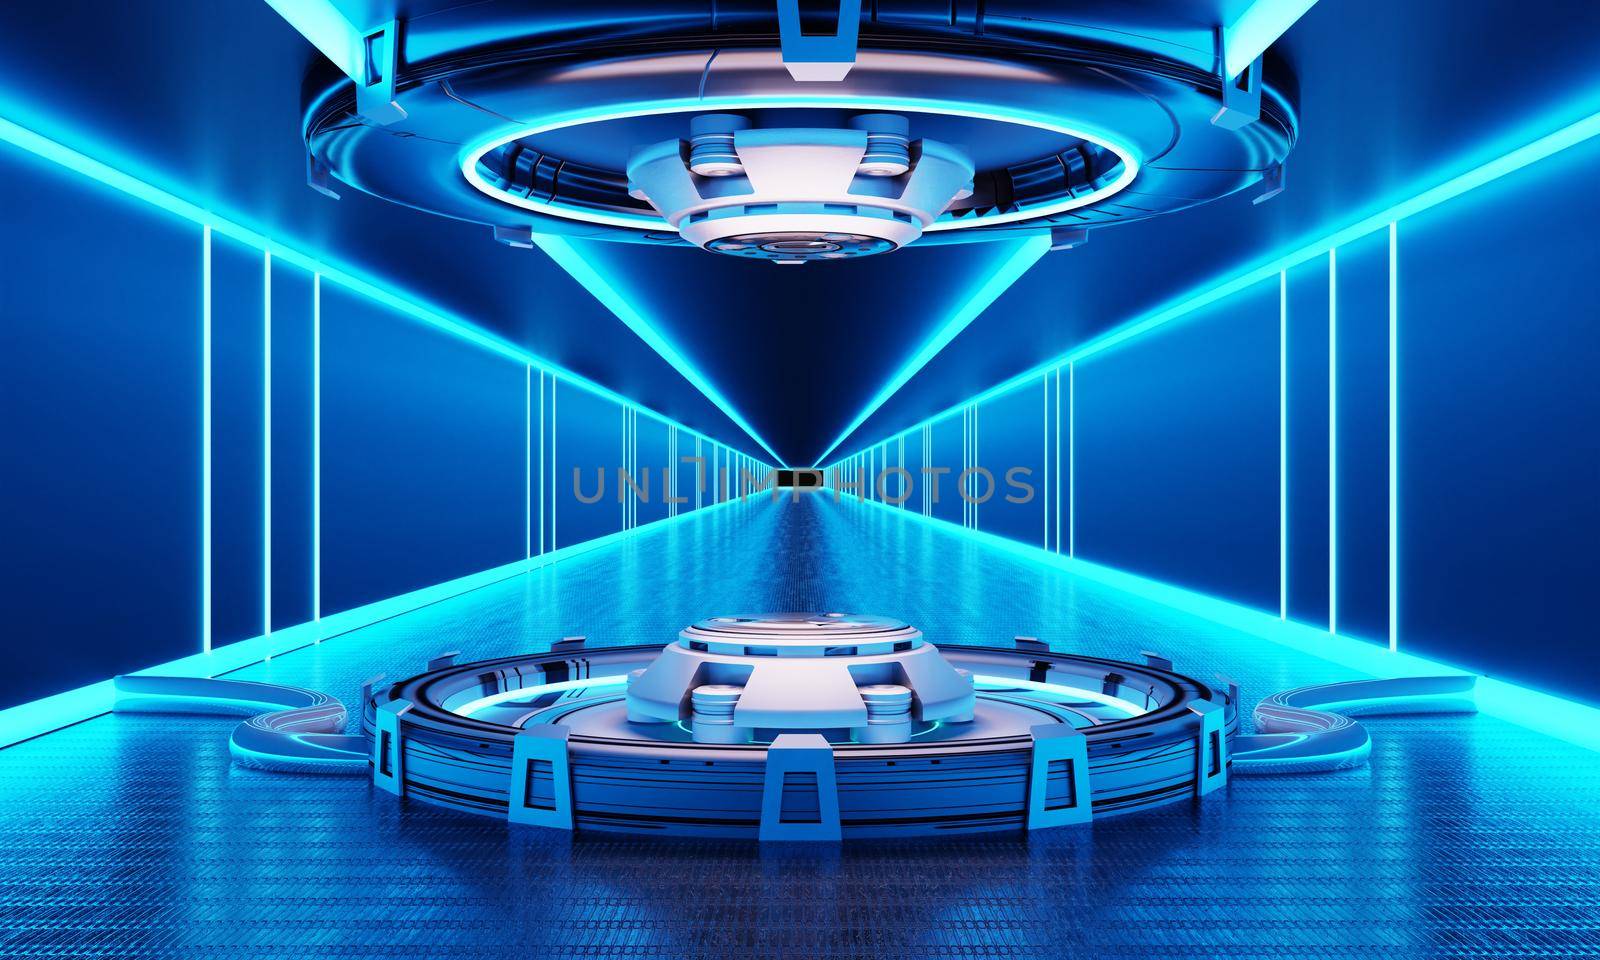 Sci-fi product podium showcase in spaceship with white and blue background. Space technology and object concept. 3D illustration rendering by MiniStocker